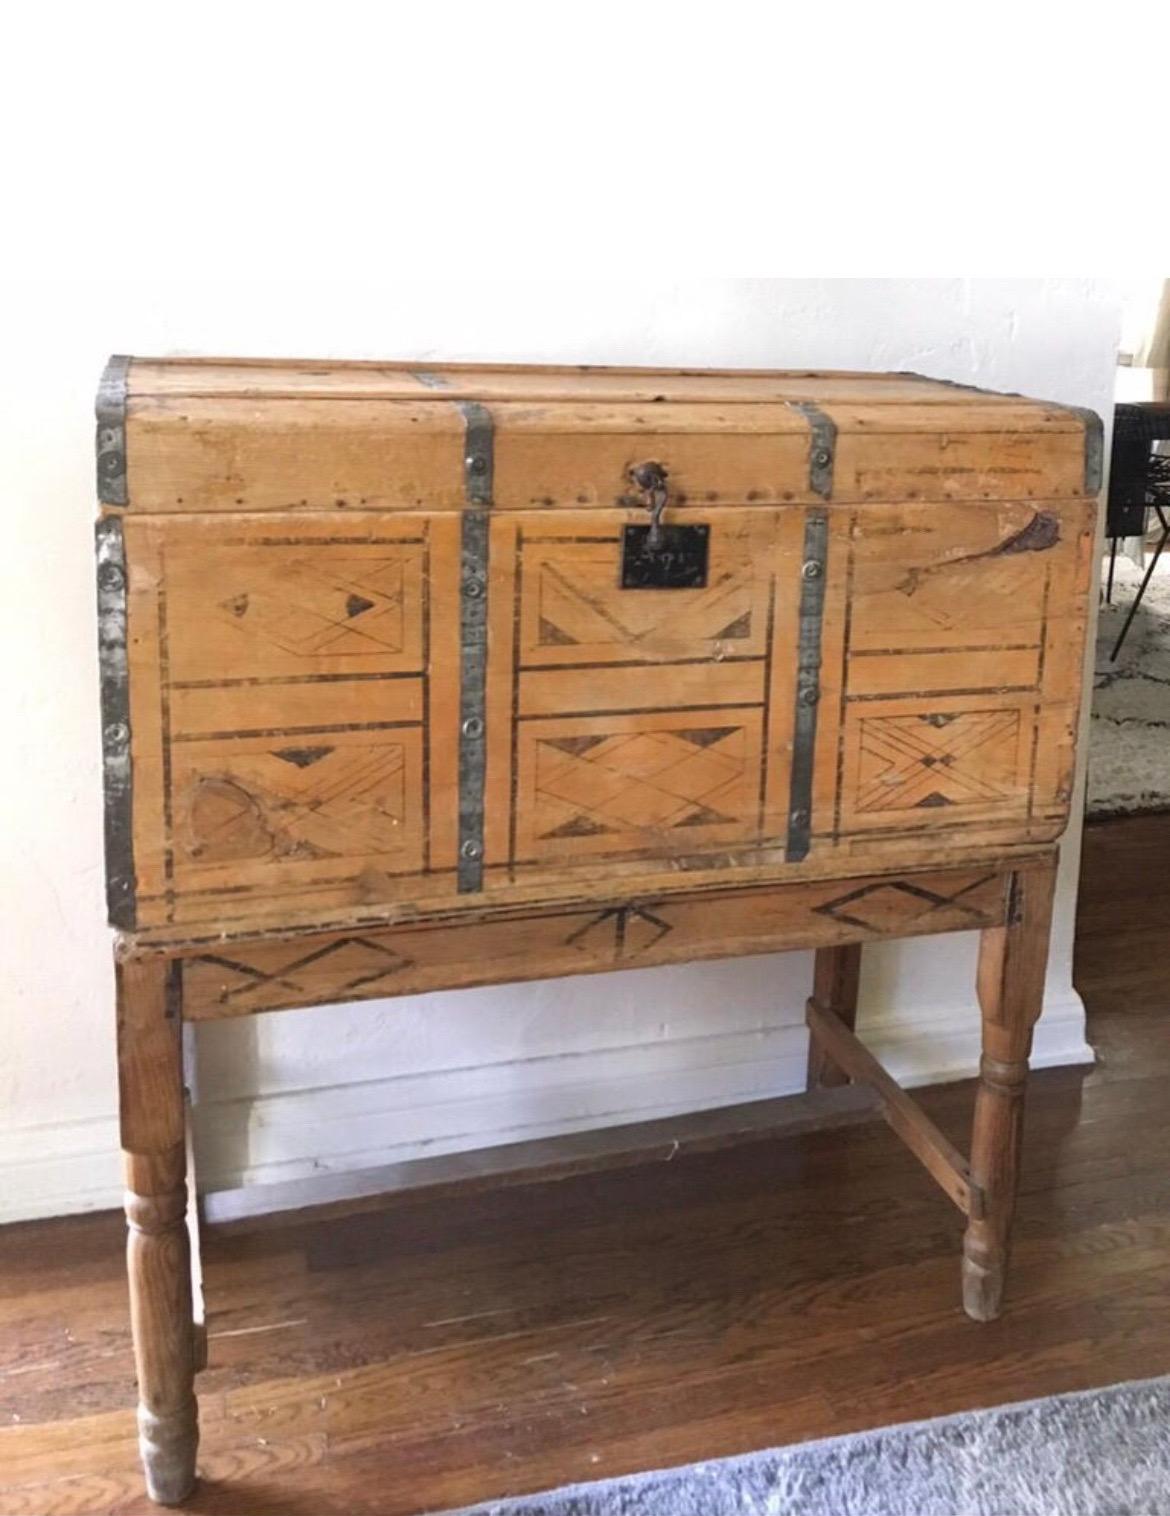 Early/Primitive hand-painted chest with tons of character. Stamped Mexico on the bottom.
Shows wear and tear consistent with age. Iron hinge with key hole (does not have the key). Stands on four legs.
Spanish/Folk Art style with beautiful bright